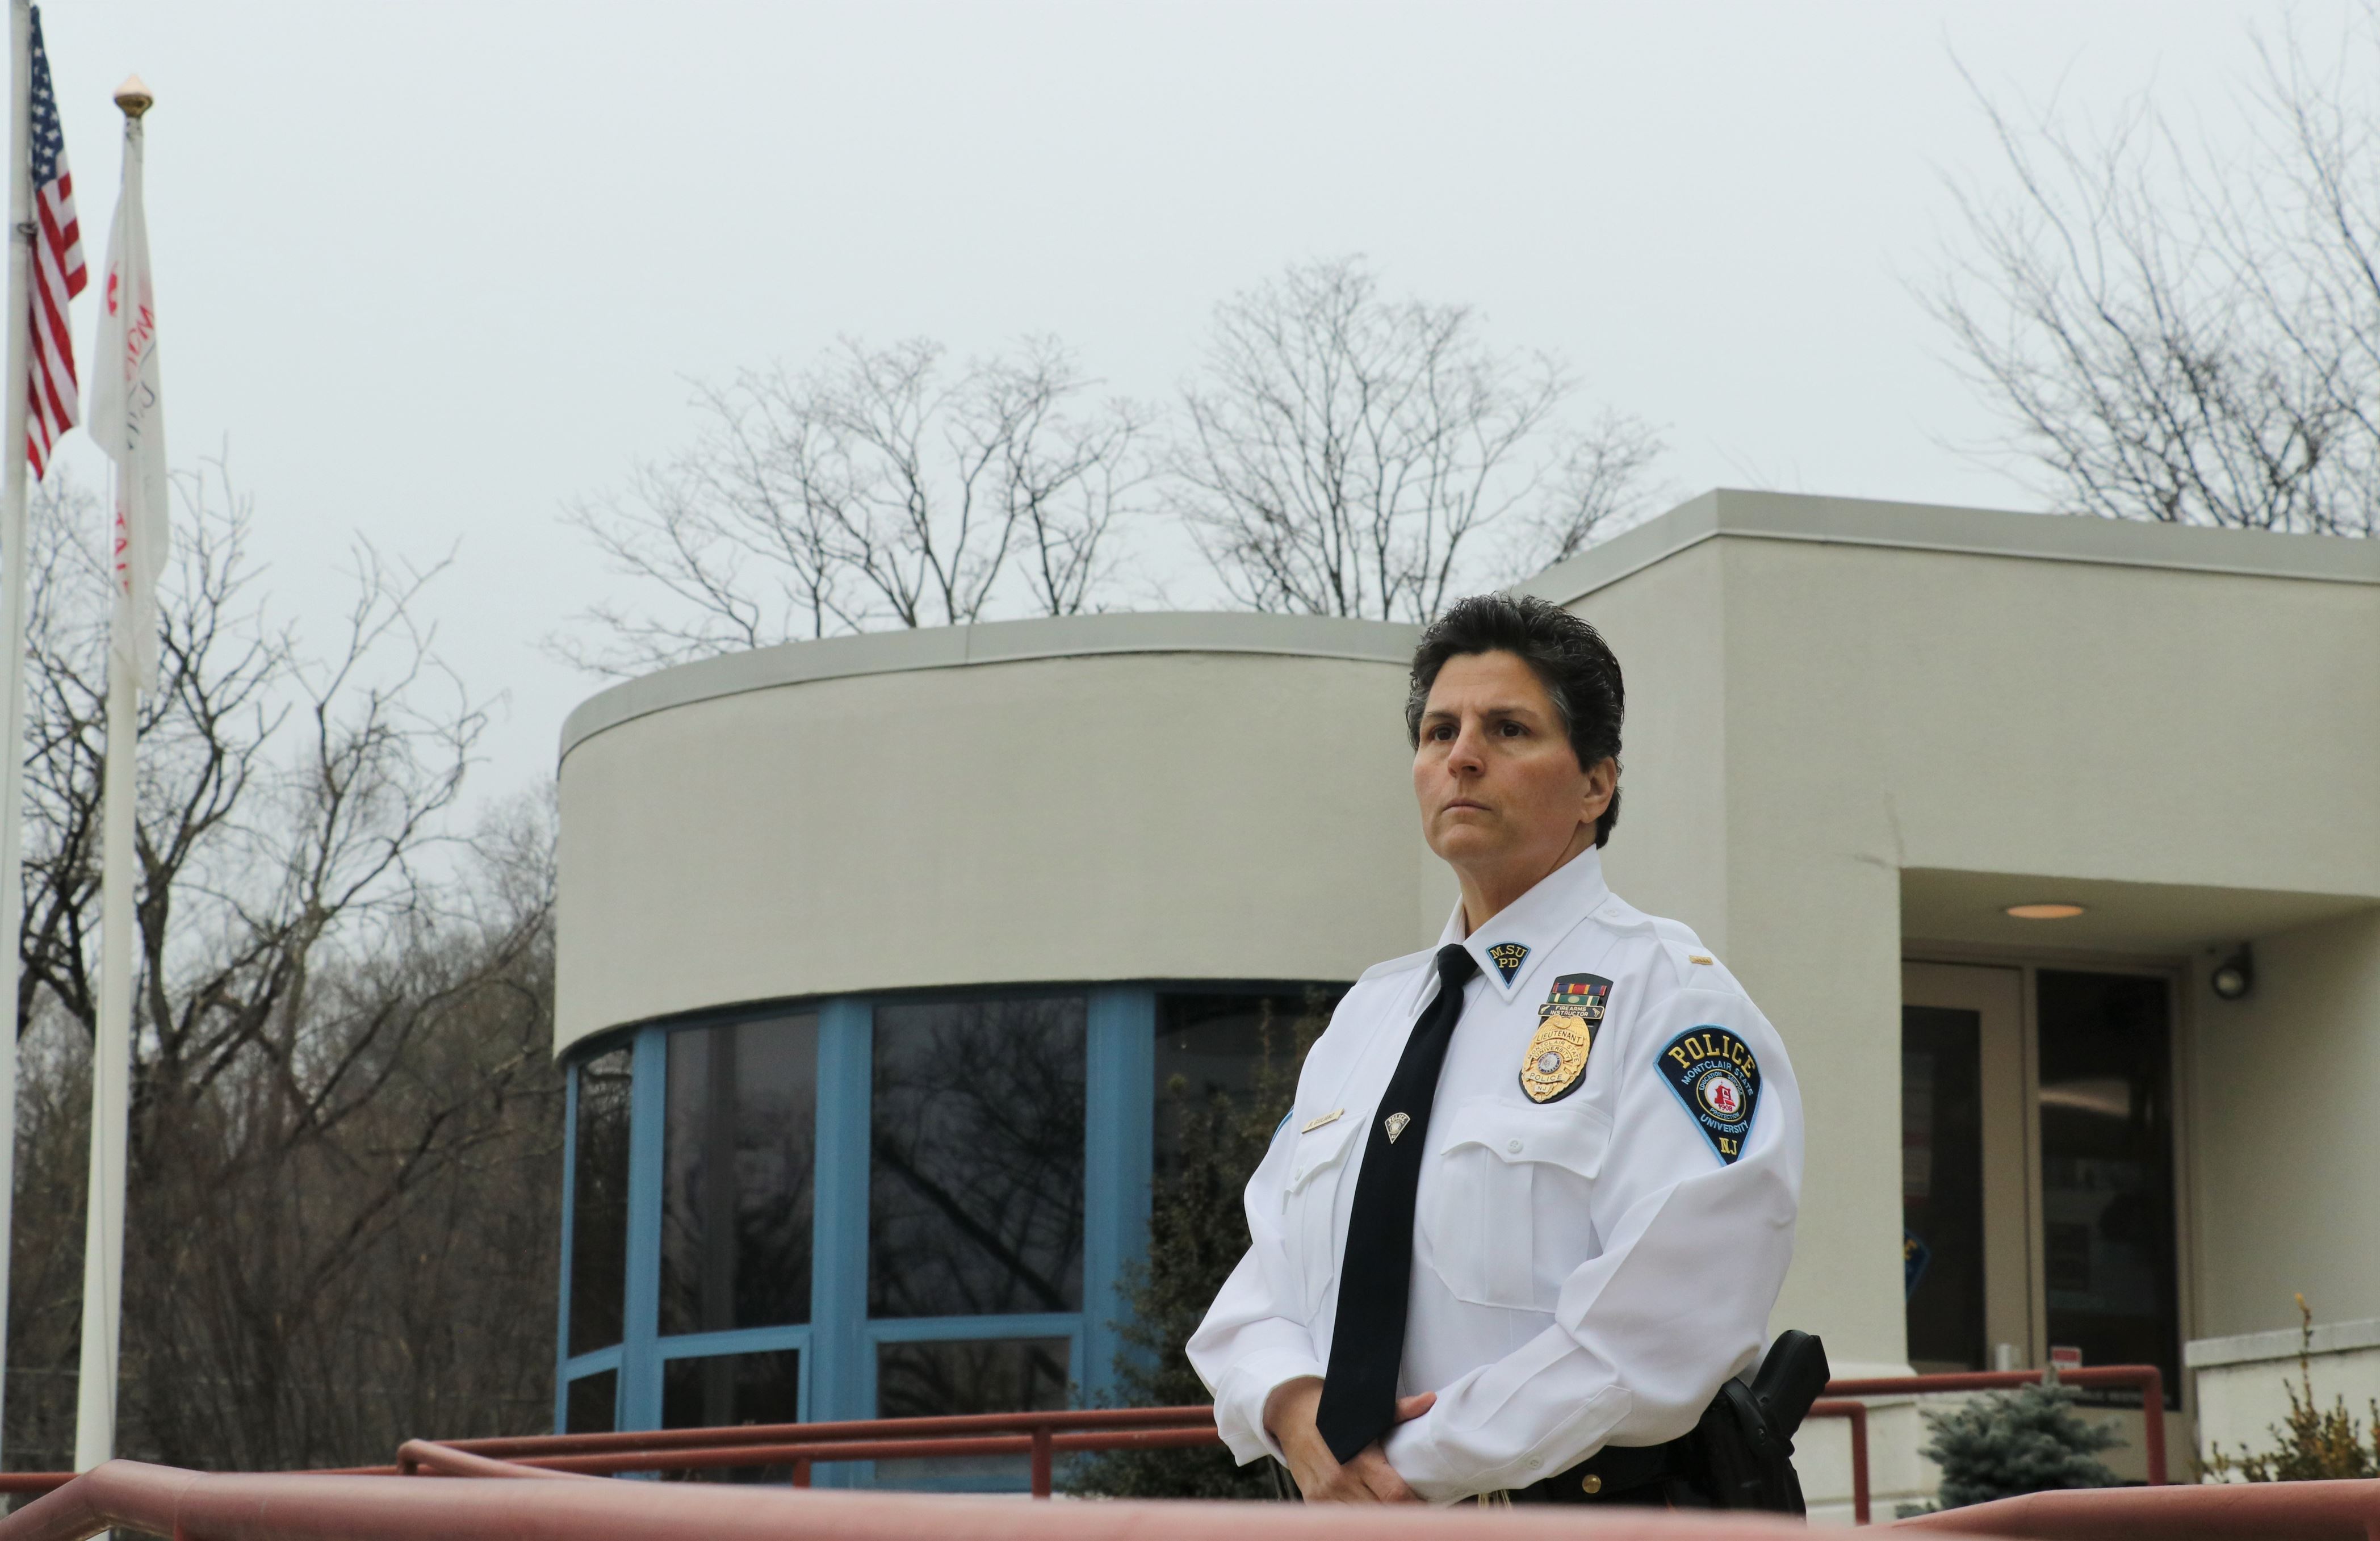 Lt. Giuliano overlooks campus from the UPD headquarters. Kristoffer Fernandes | The Montclarion